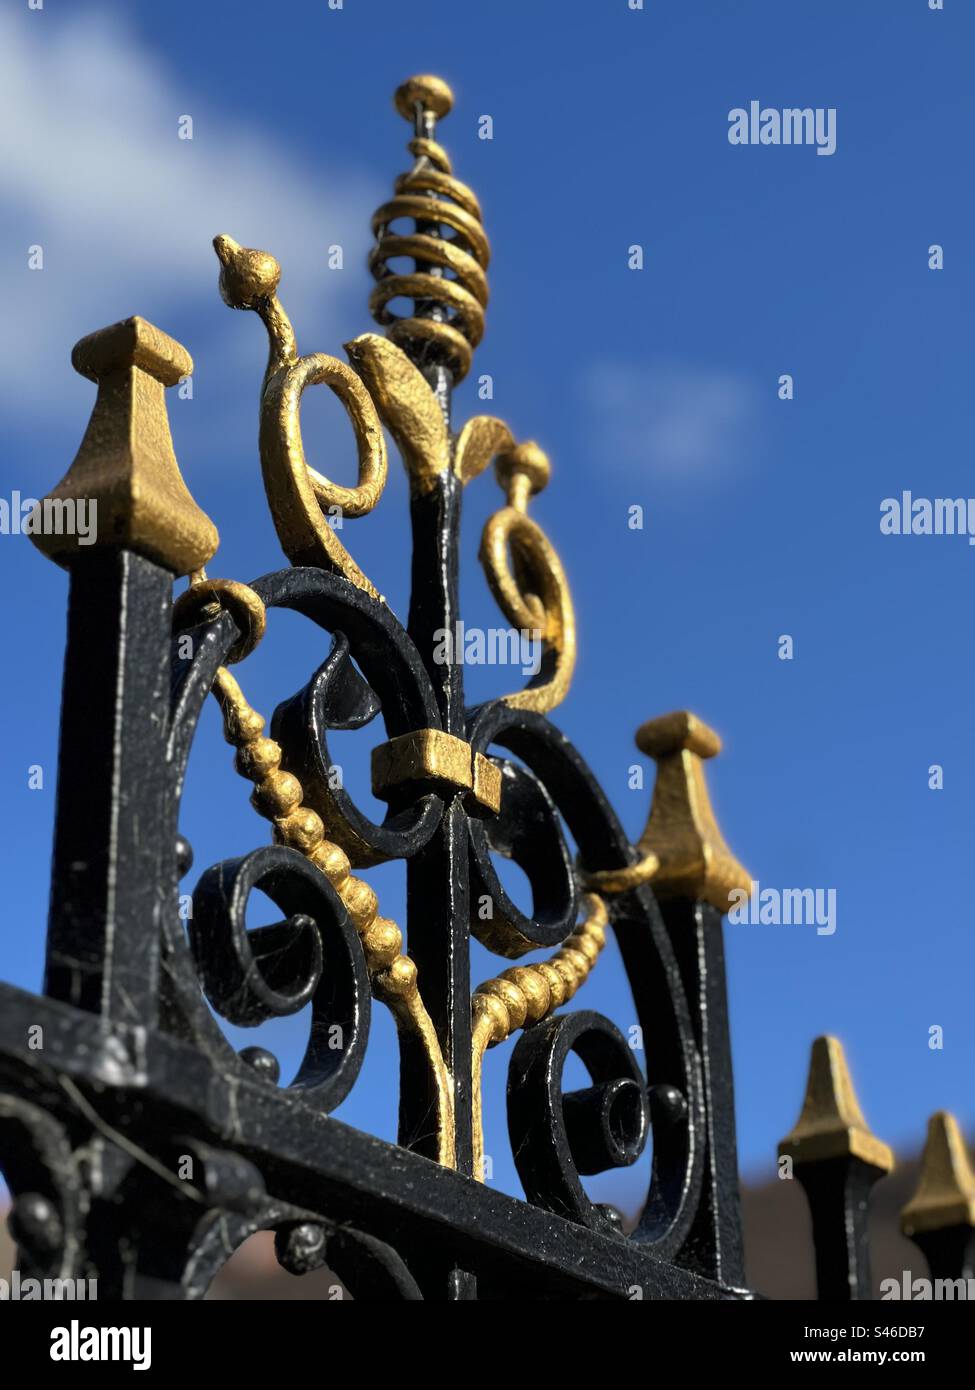 Guilted fret work in Chester England against a blue skies Stock Photo